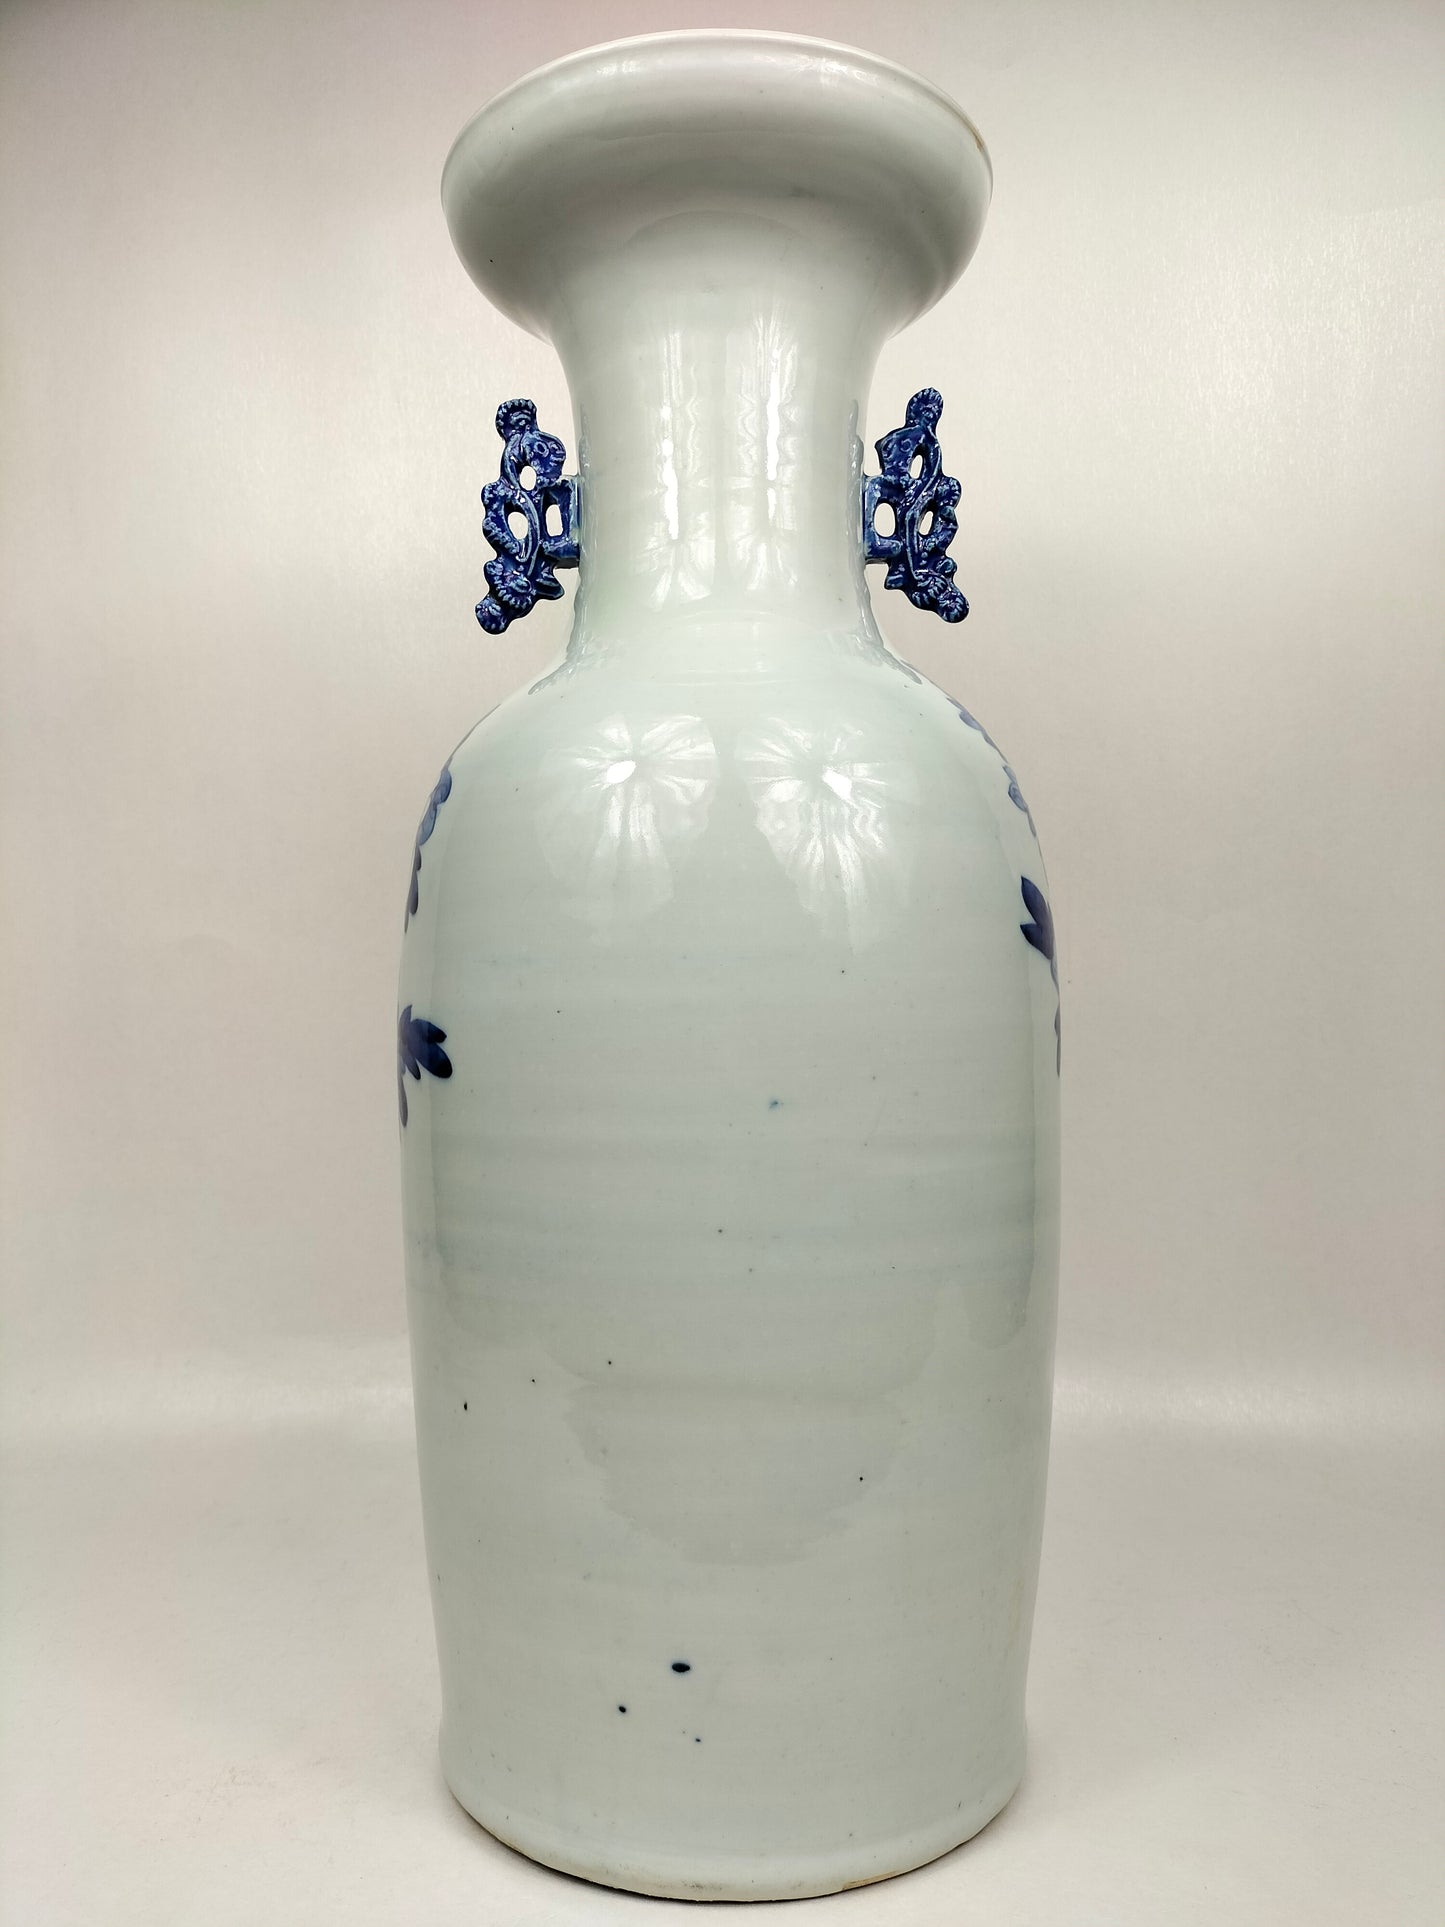 Large antique Chinese vase with cranes and flowers // Blue and white - Qing Dynasty - 19th century